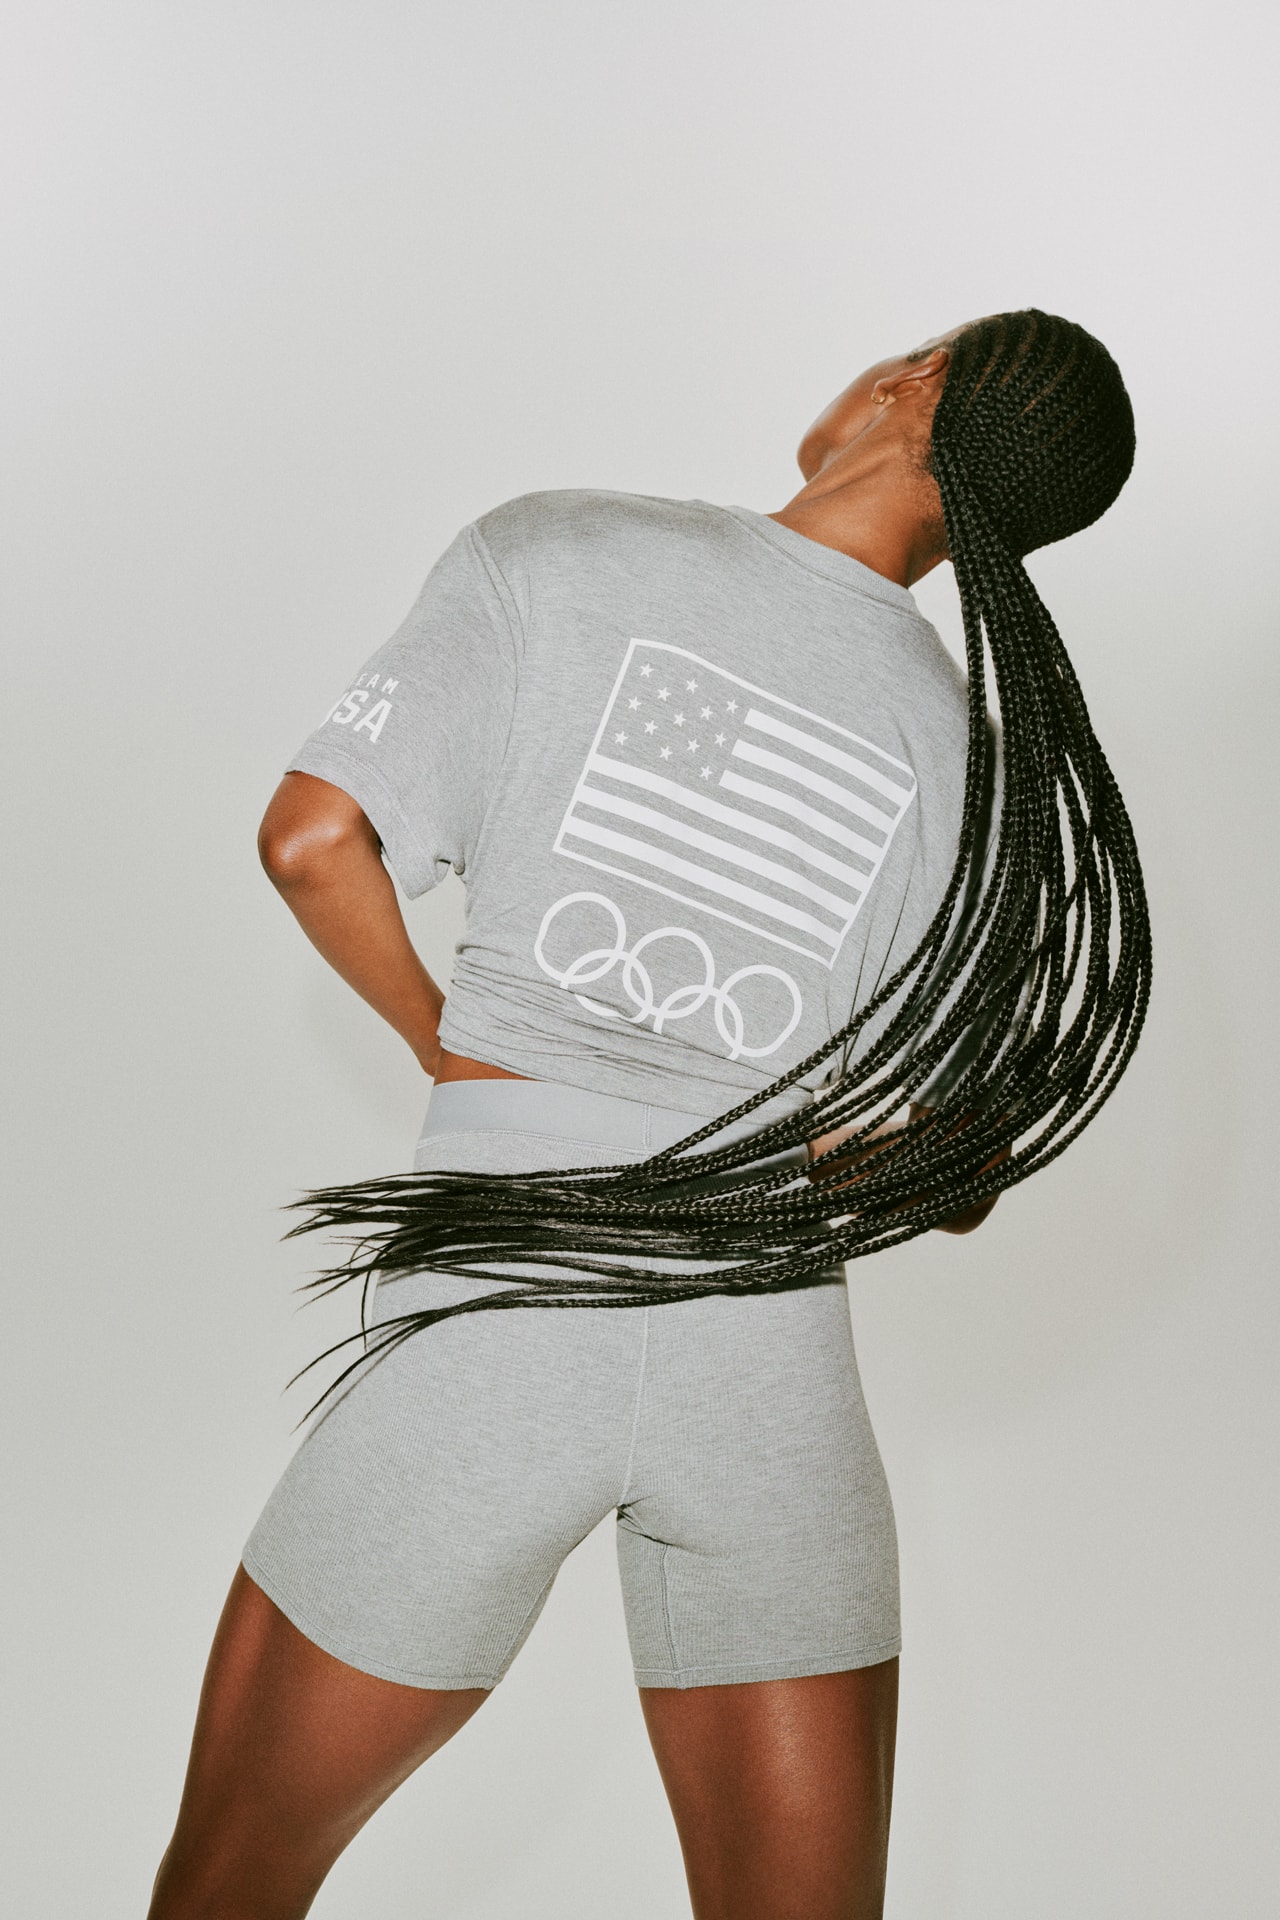 SKIMS for @TeamUSA. Together, we created an exclusive collection